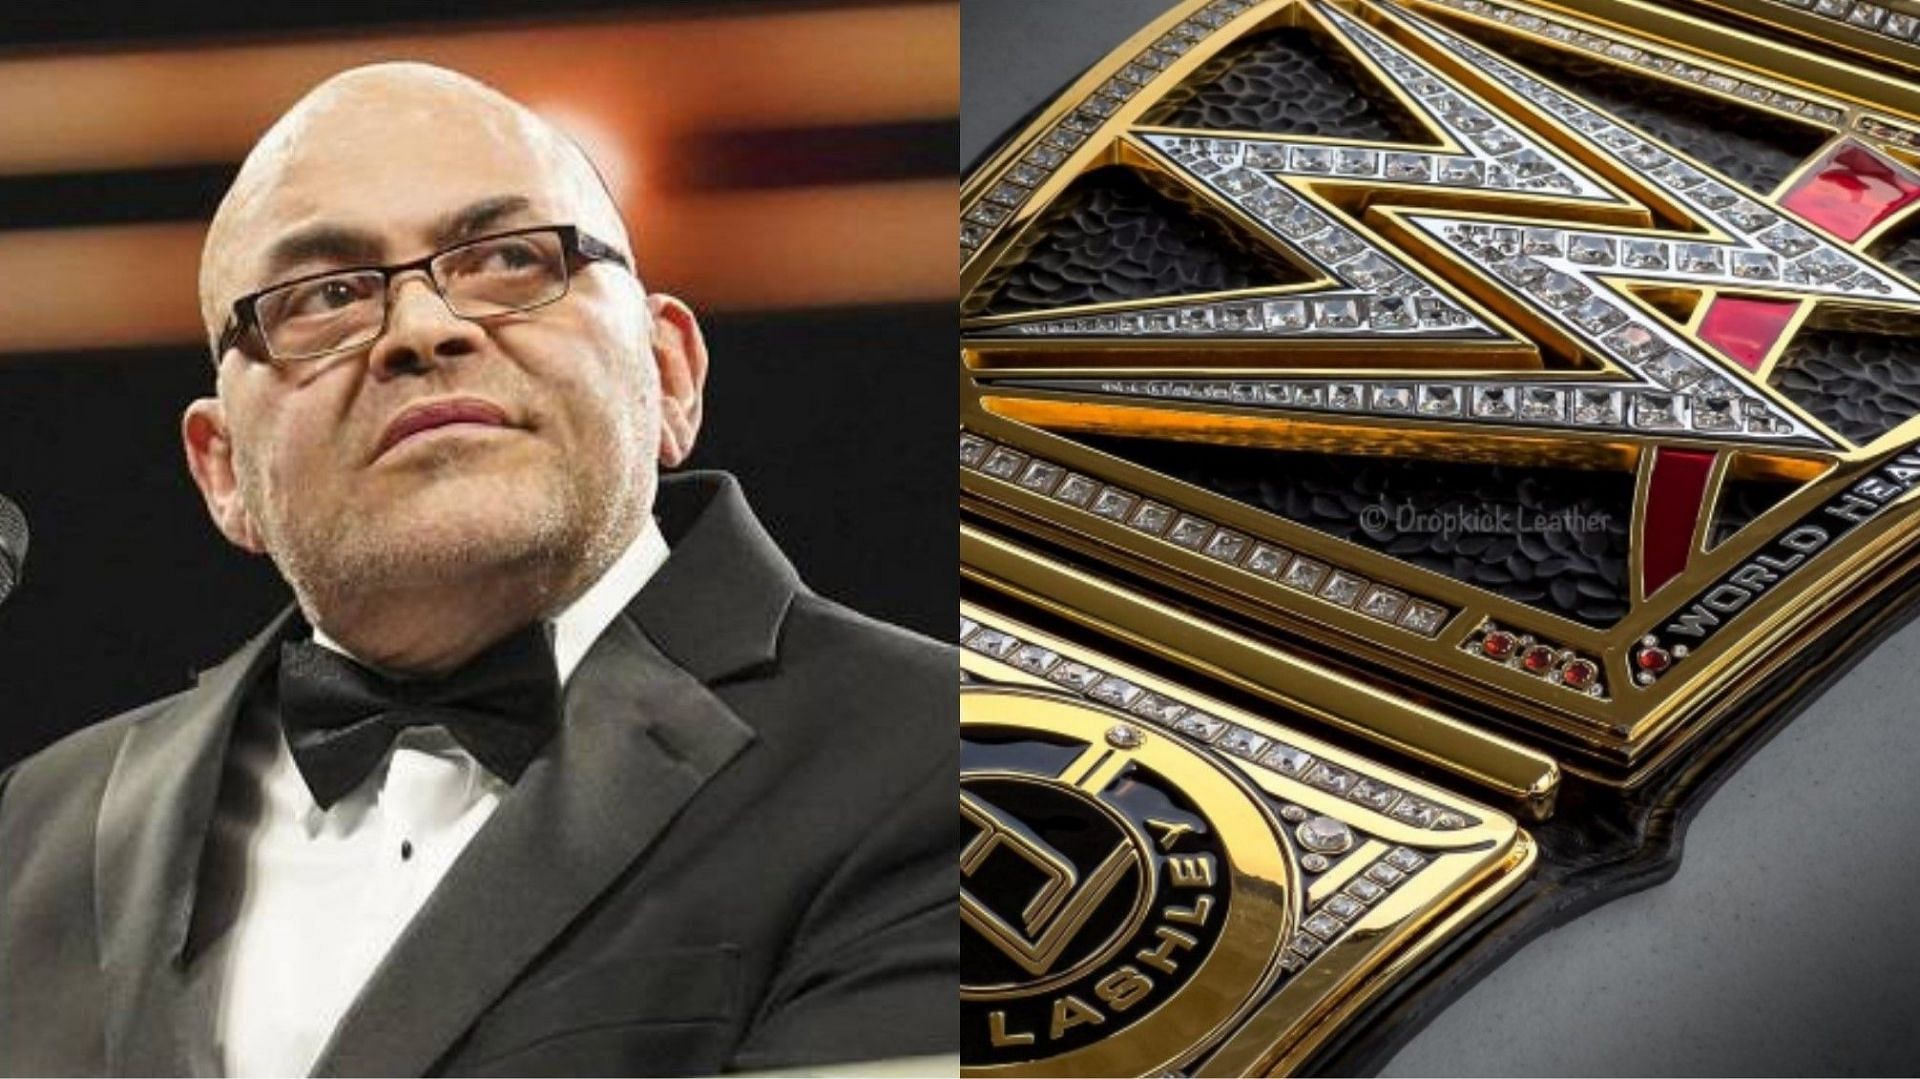 Konnan cut a memorable speech at WWE Hall of Fame this year